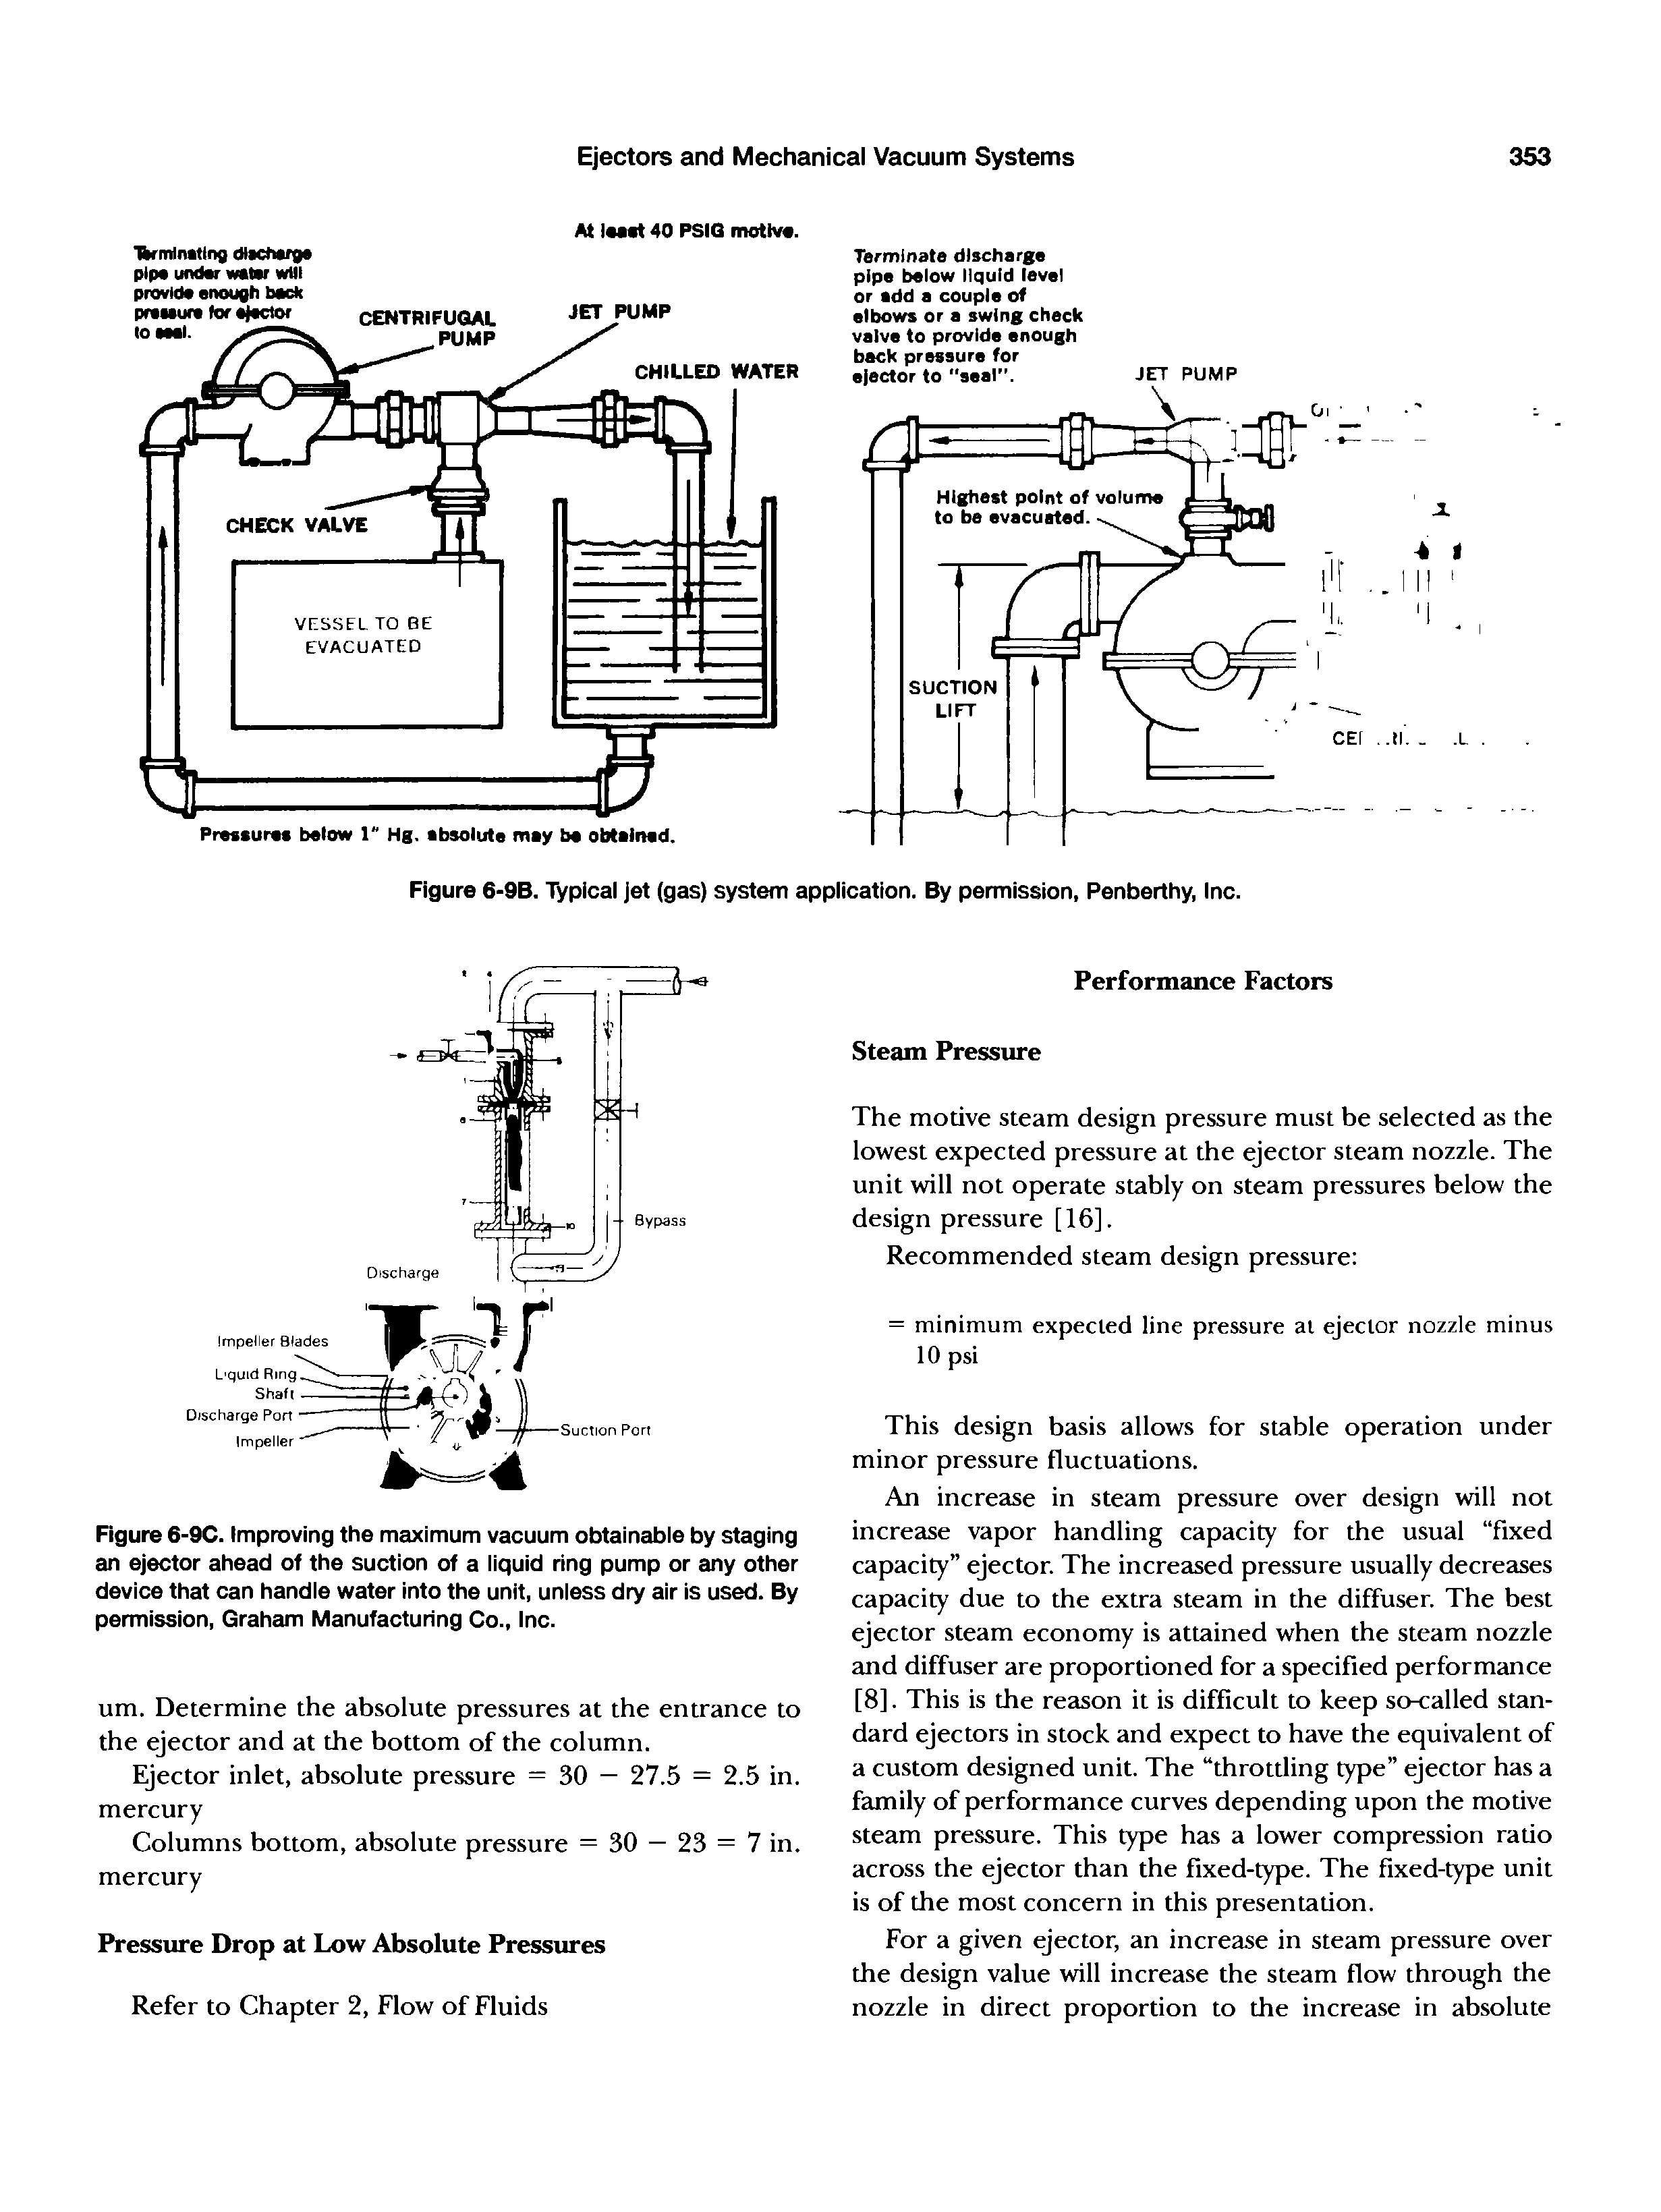 Figure 6-9C. Improving the maximum vacuum obtainabie by staging an ejector ahead of the suction of a iiquid ring pump or any other device that can handie water into the unit, uniess dry air is used. By permission, Graham Manufacturing Co., Inc.